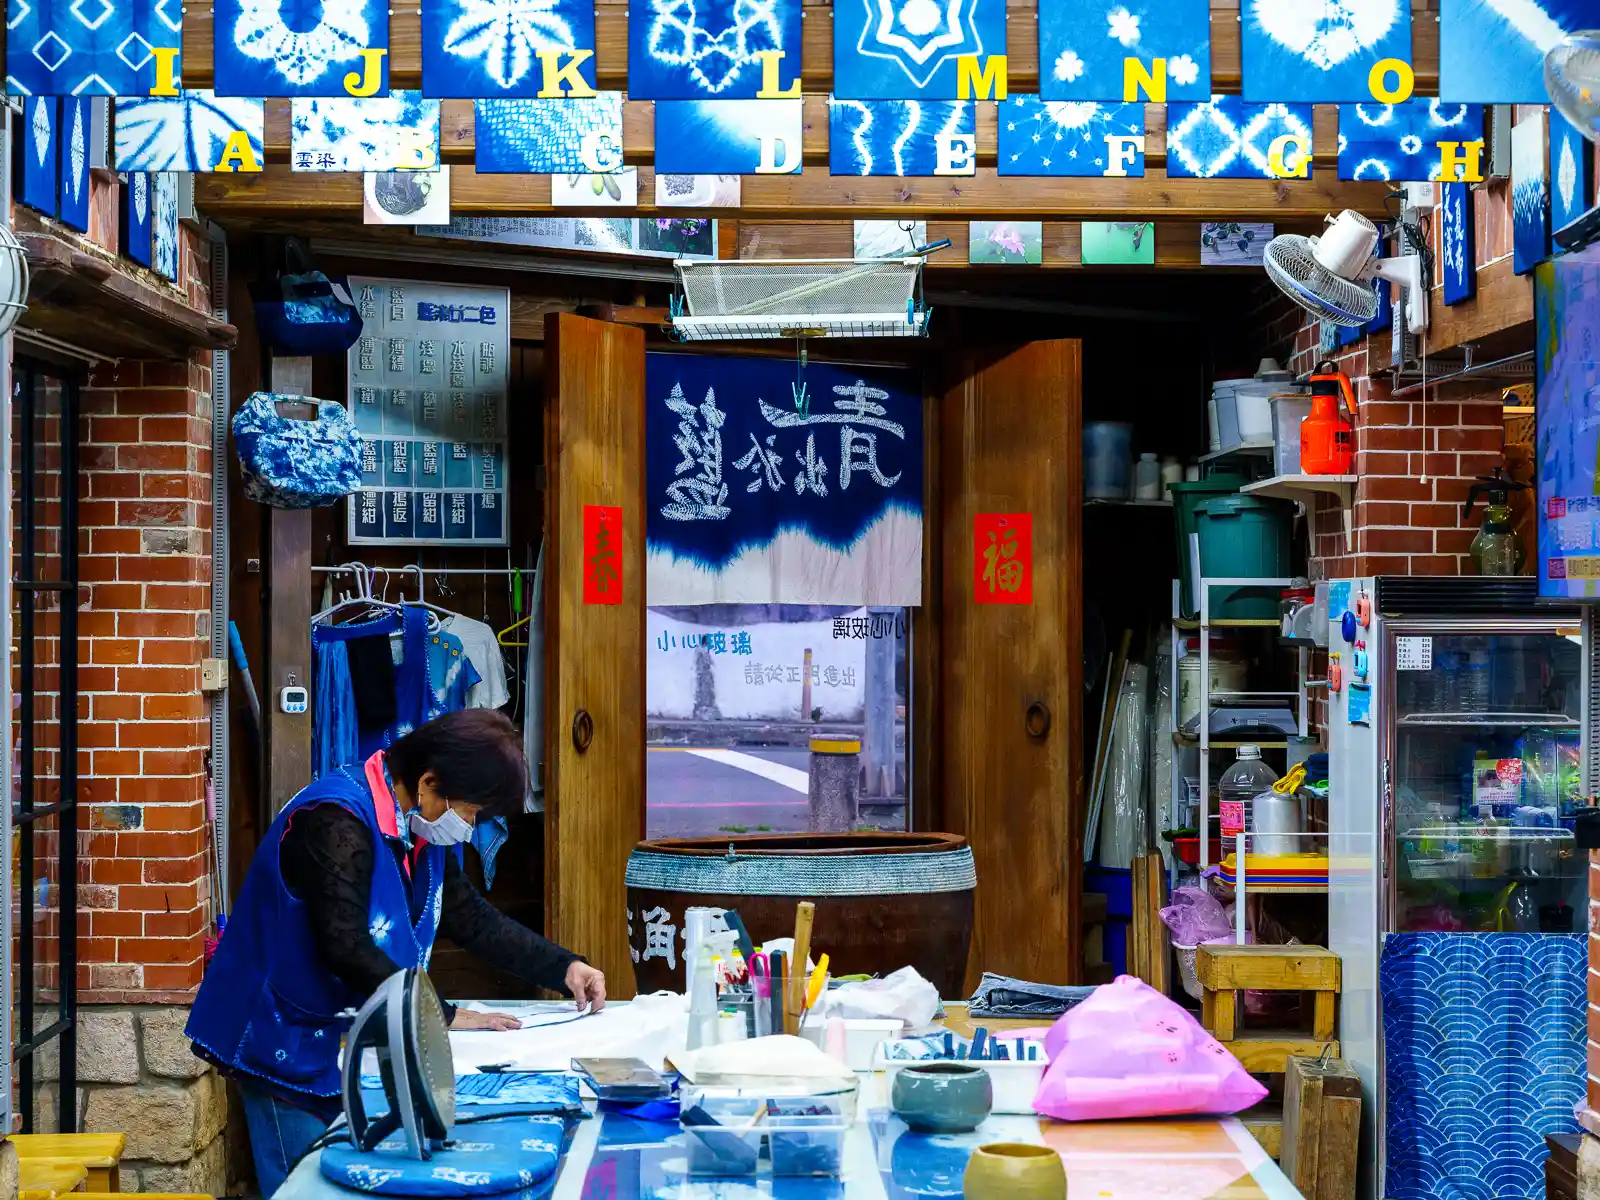 An employee prepares materials for dyeing at Sanxi Indigo Dyeing Centre.